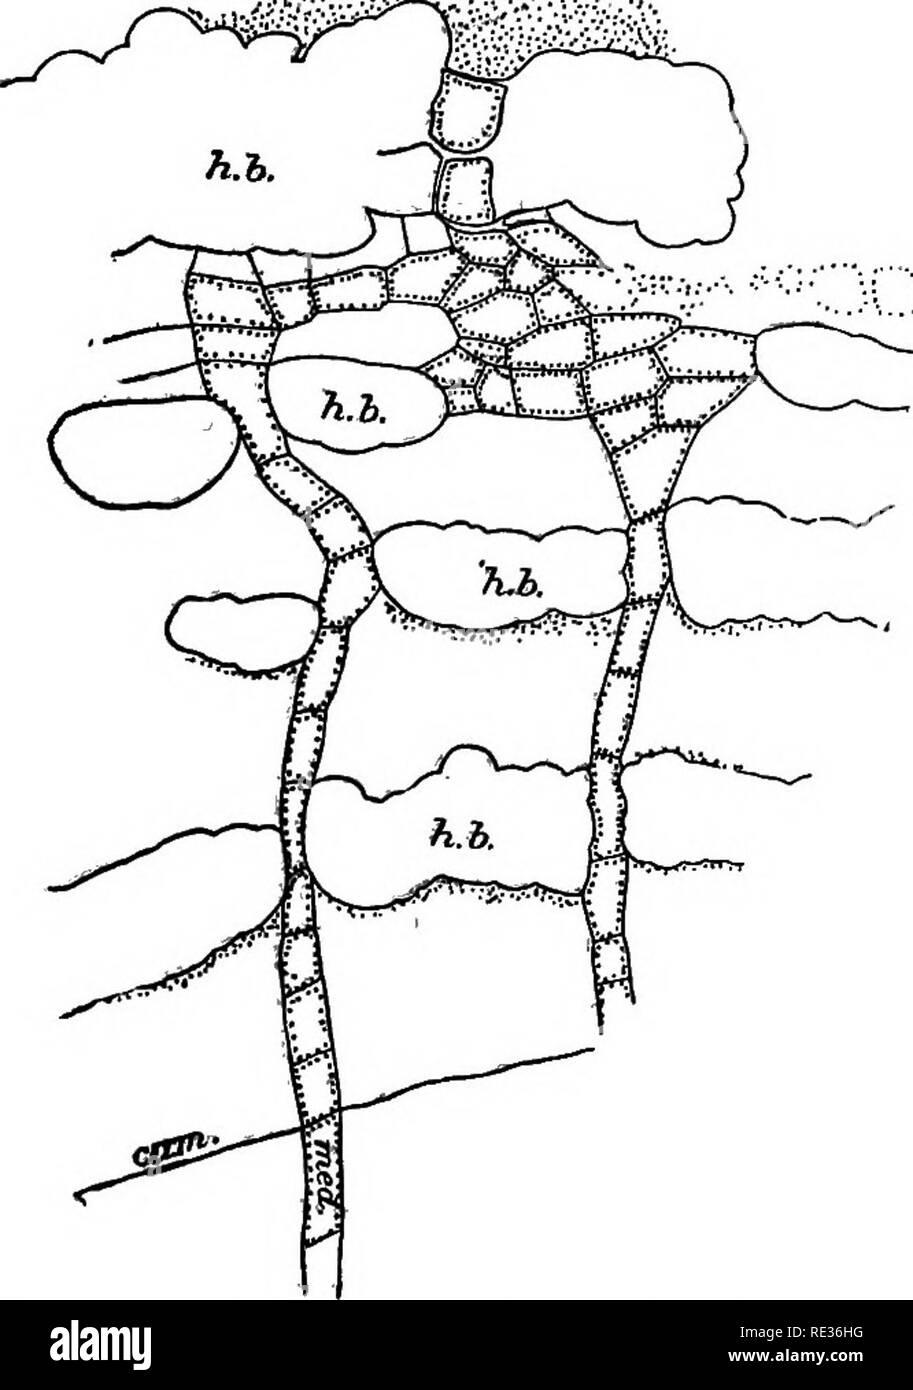 . The topography of the chlorophyll apparatus in desert plants. Chlorophyll; Desert plants; Plants. PROSOPIS VELUTINA. 27 cKh. Stems older than one year have in the cortex a varying number of concen- trically placed hard-bast rings which are broken at intervals where the medullary rays penetrate the cortex. Between the rings of hard bast is to be found a thin-walled parenchyma. It is the disposal of the hard bast, together with the disposal of this parenchyma, that in stems 4 cm. in diameter and less determines the character of the distribution of chlorophyll in the inner portion of the cortex Stock Photo